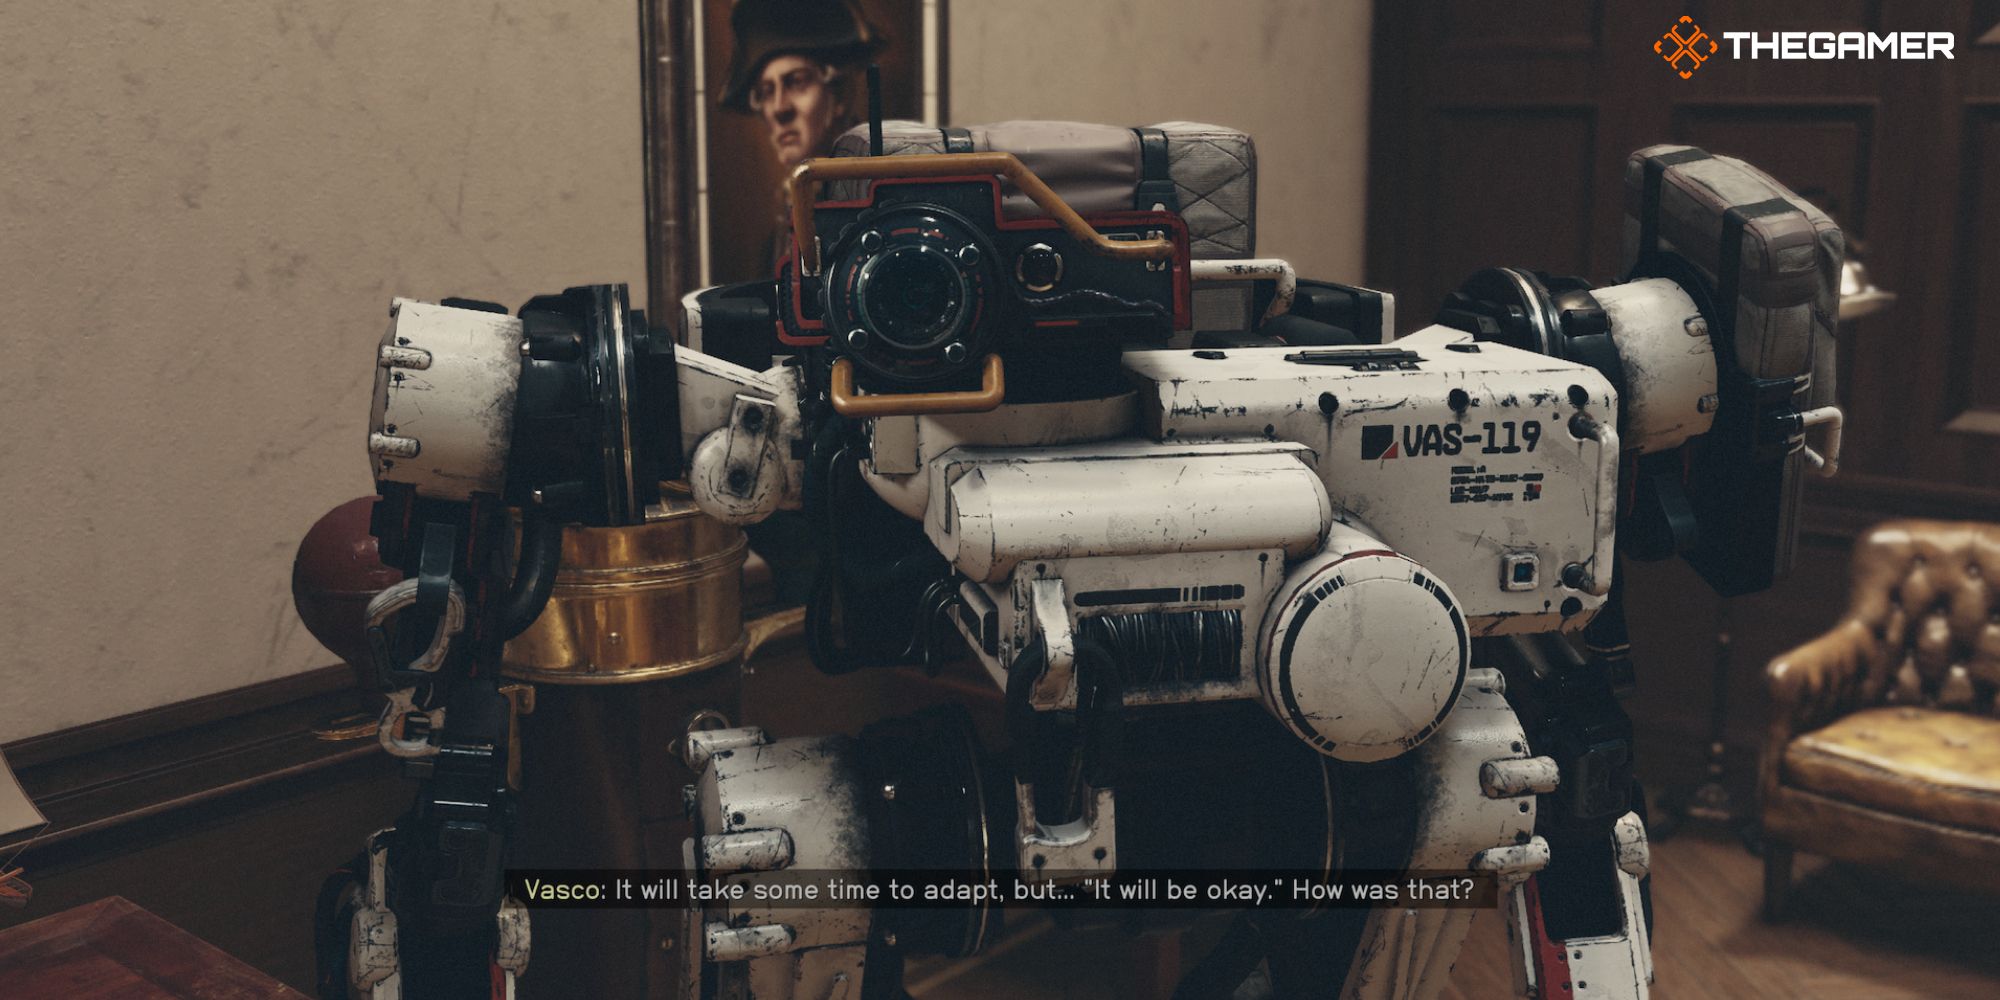 The robot Vasco attempts to comfort you, saying it will be okay.